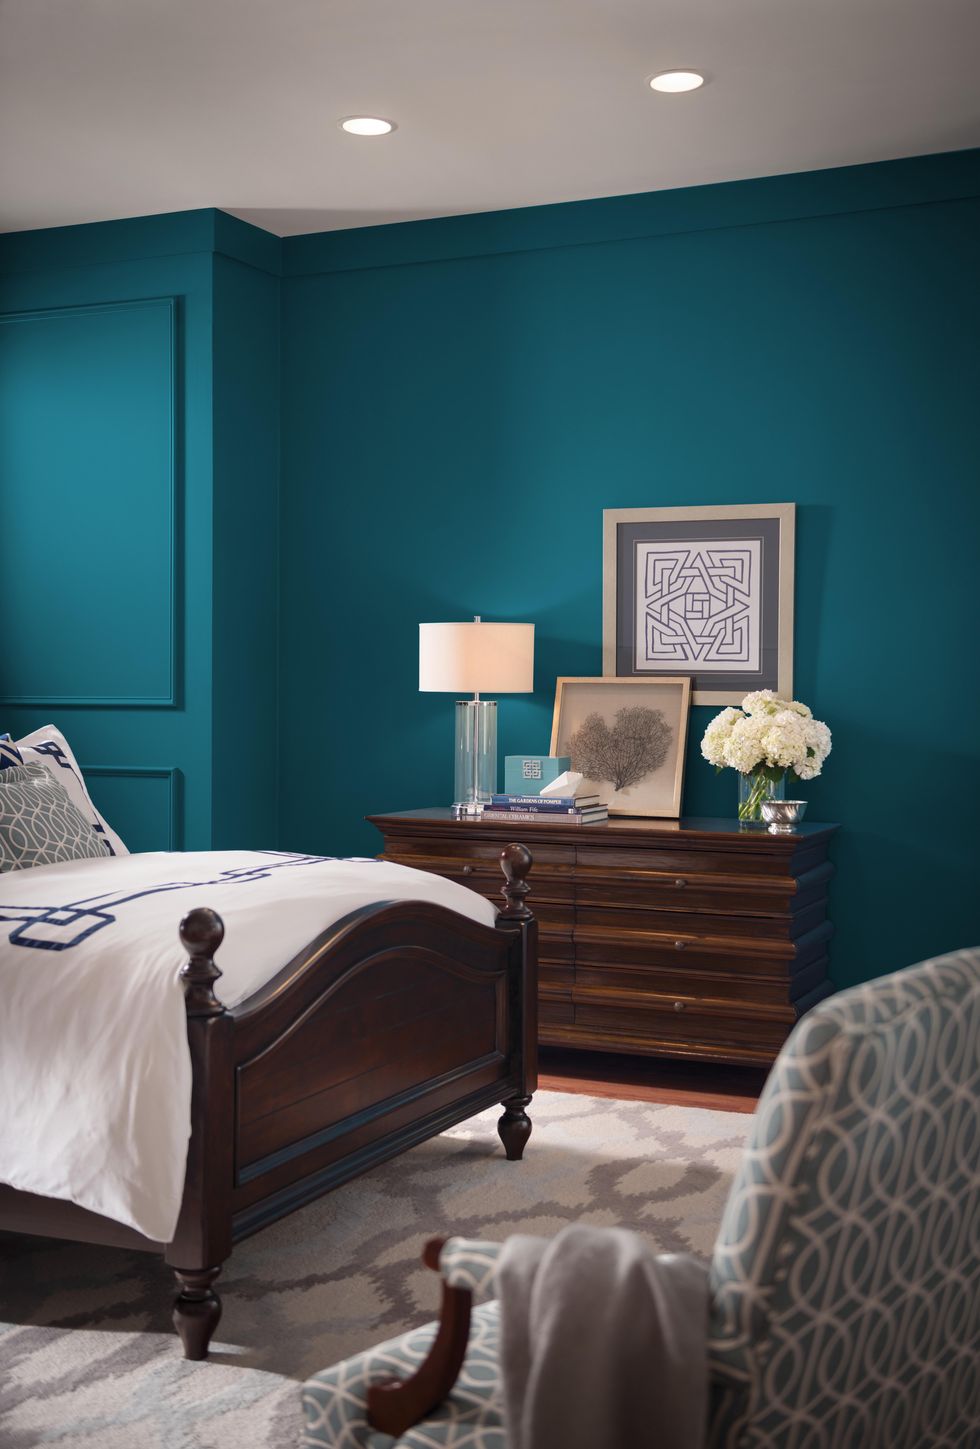 Sherwin-Williams' 2018 color of the year